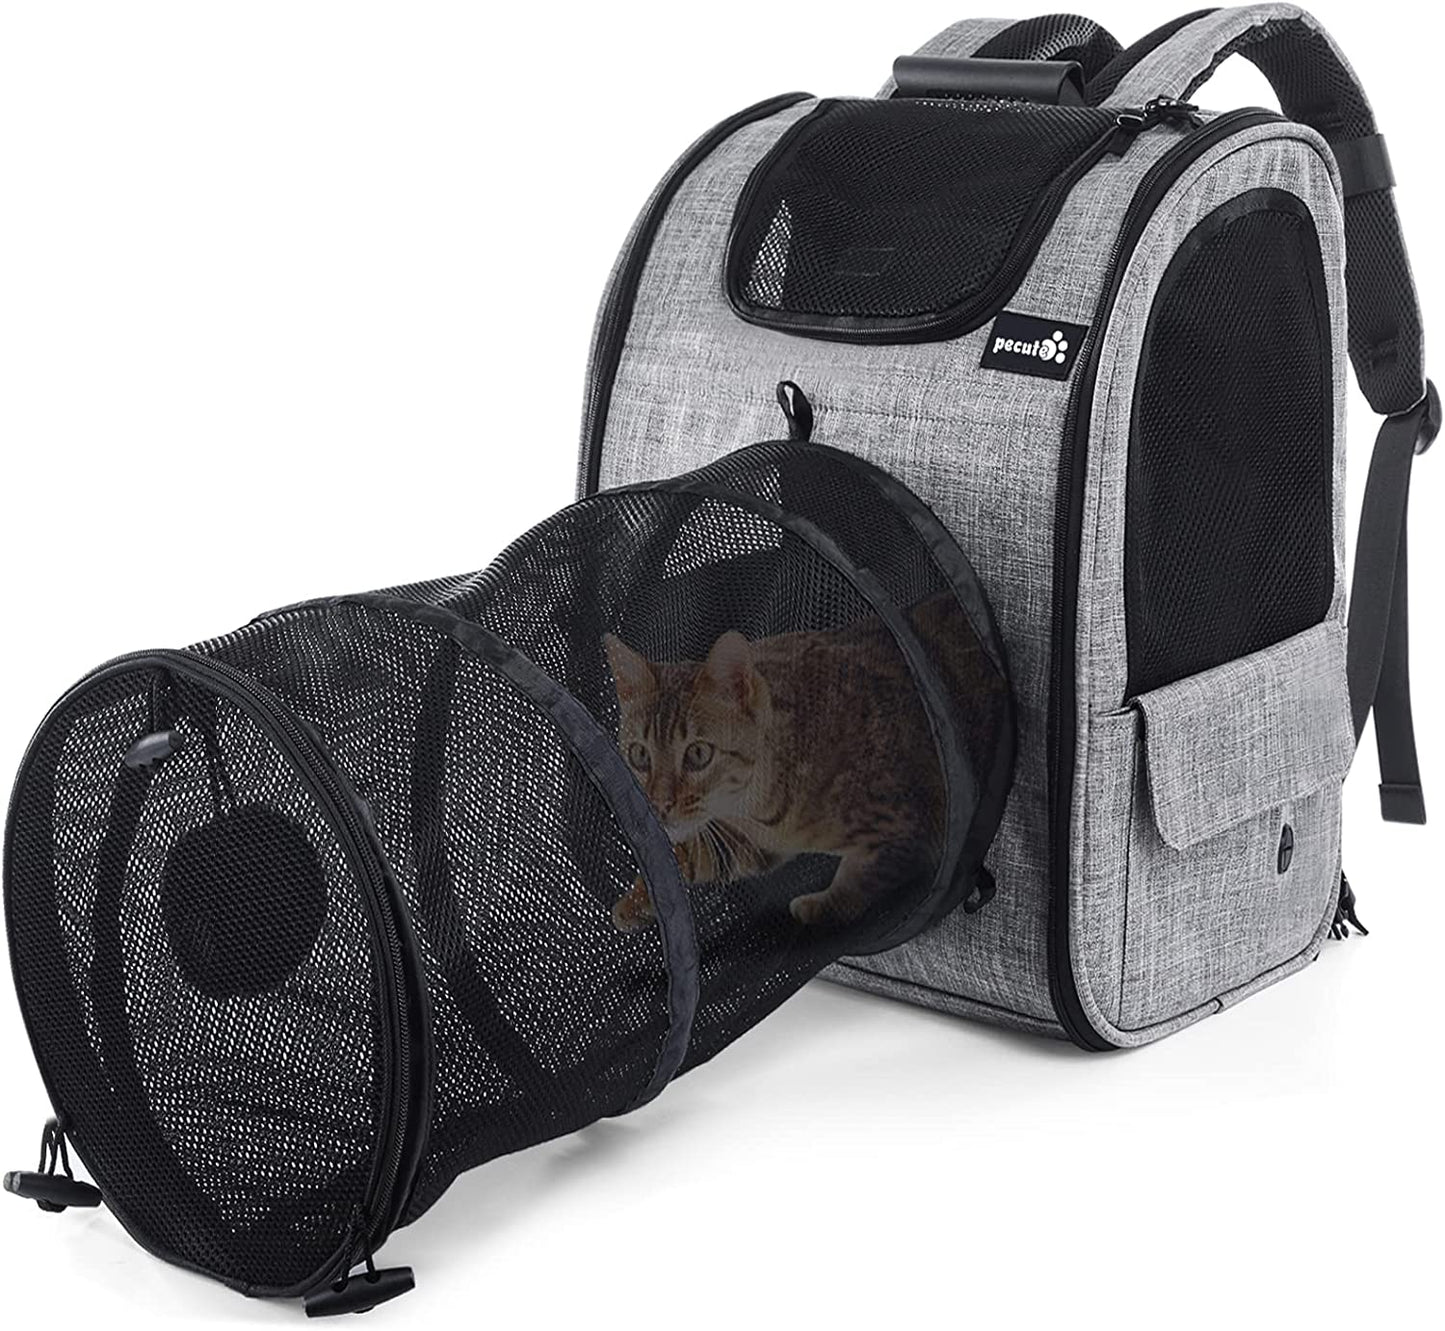 Pet Carrier Backpack with Tunnel, Dog Carrier Backpack Expandable Tunnel and Breathable Mesh for Cats Puppies, Pet Backpack Bag for Hiking Travel Camping Outdoor Hold Pets up to 18 Lbs